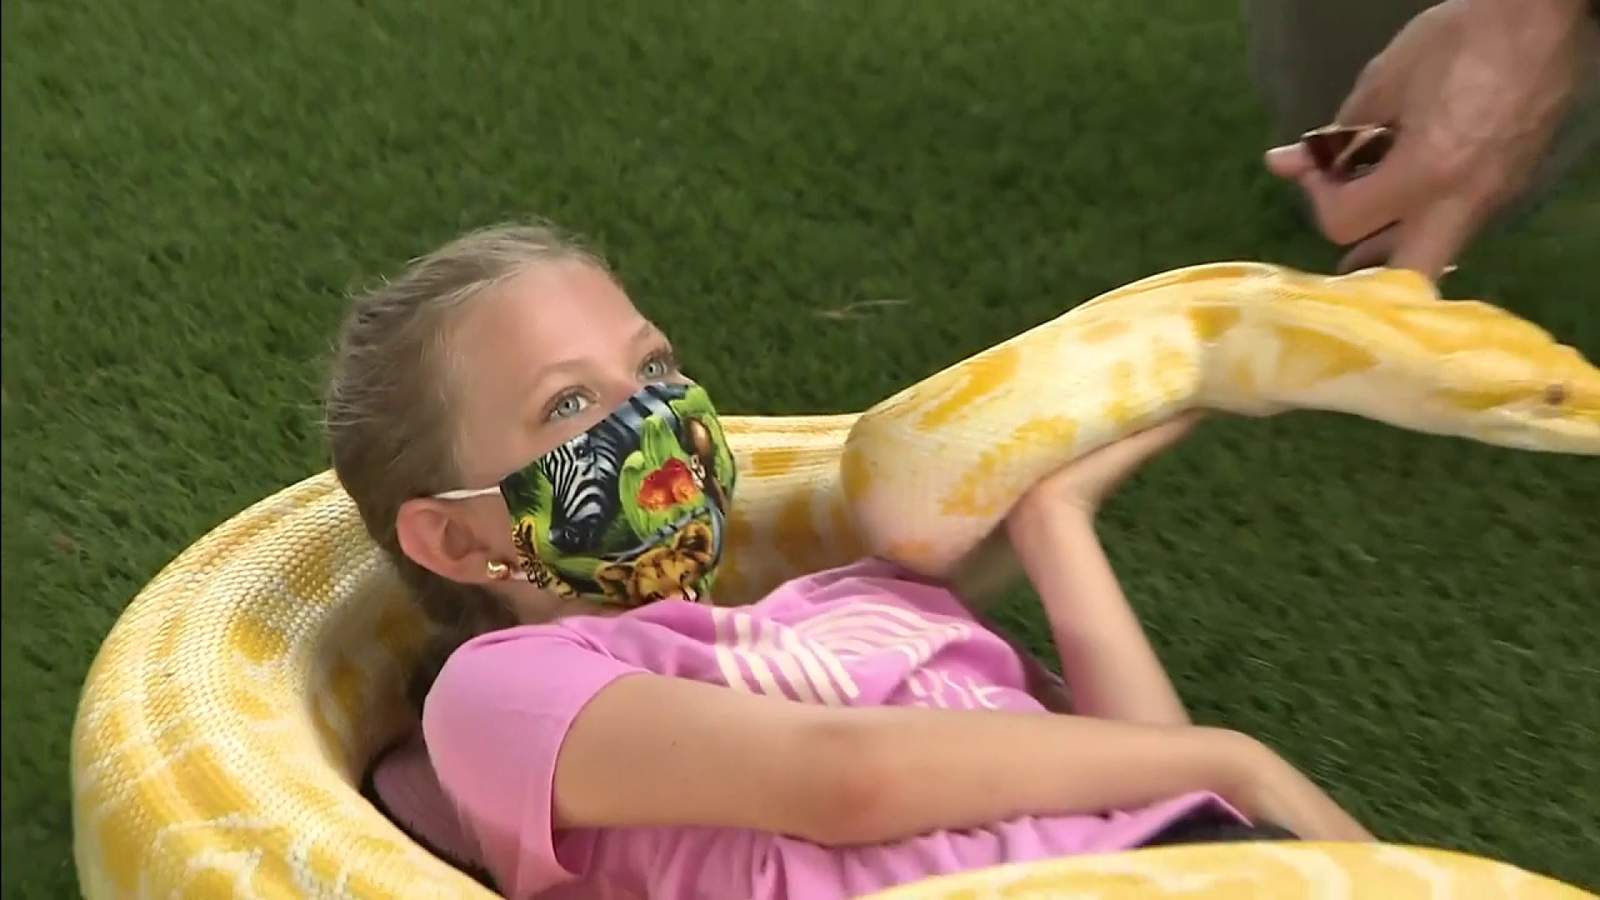 Zoo Miami opens for one girl who shows her bravery